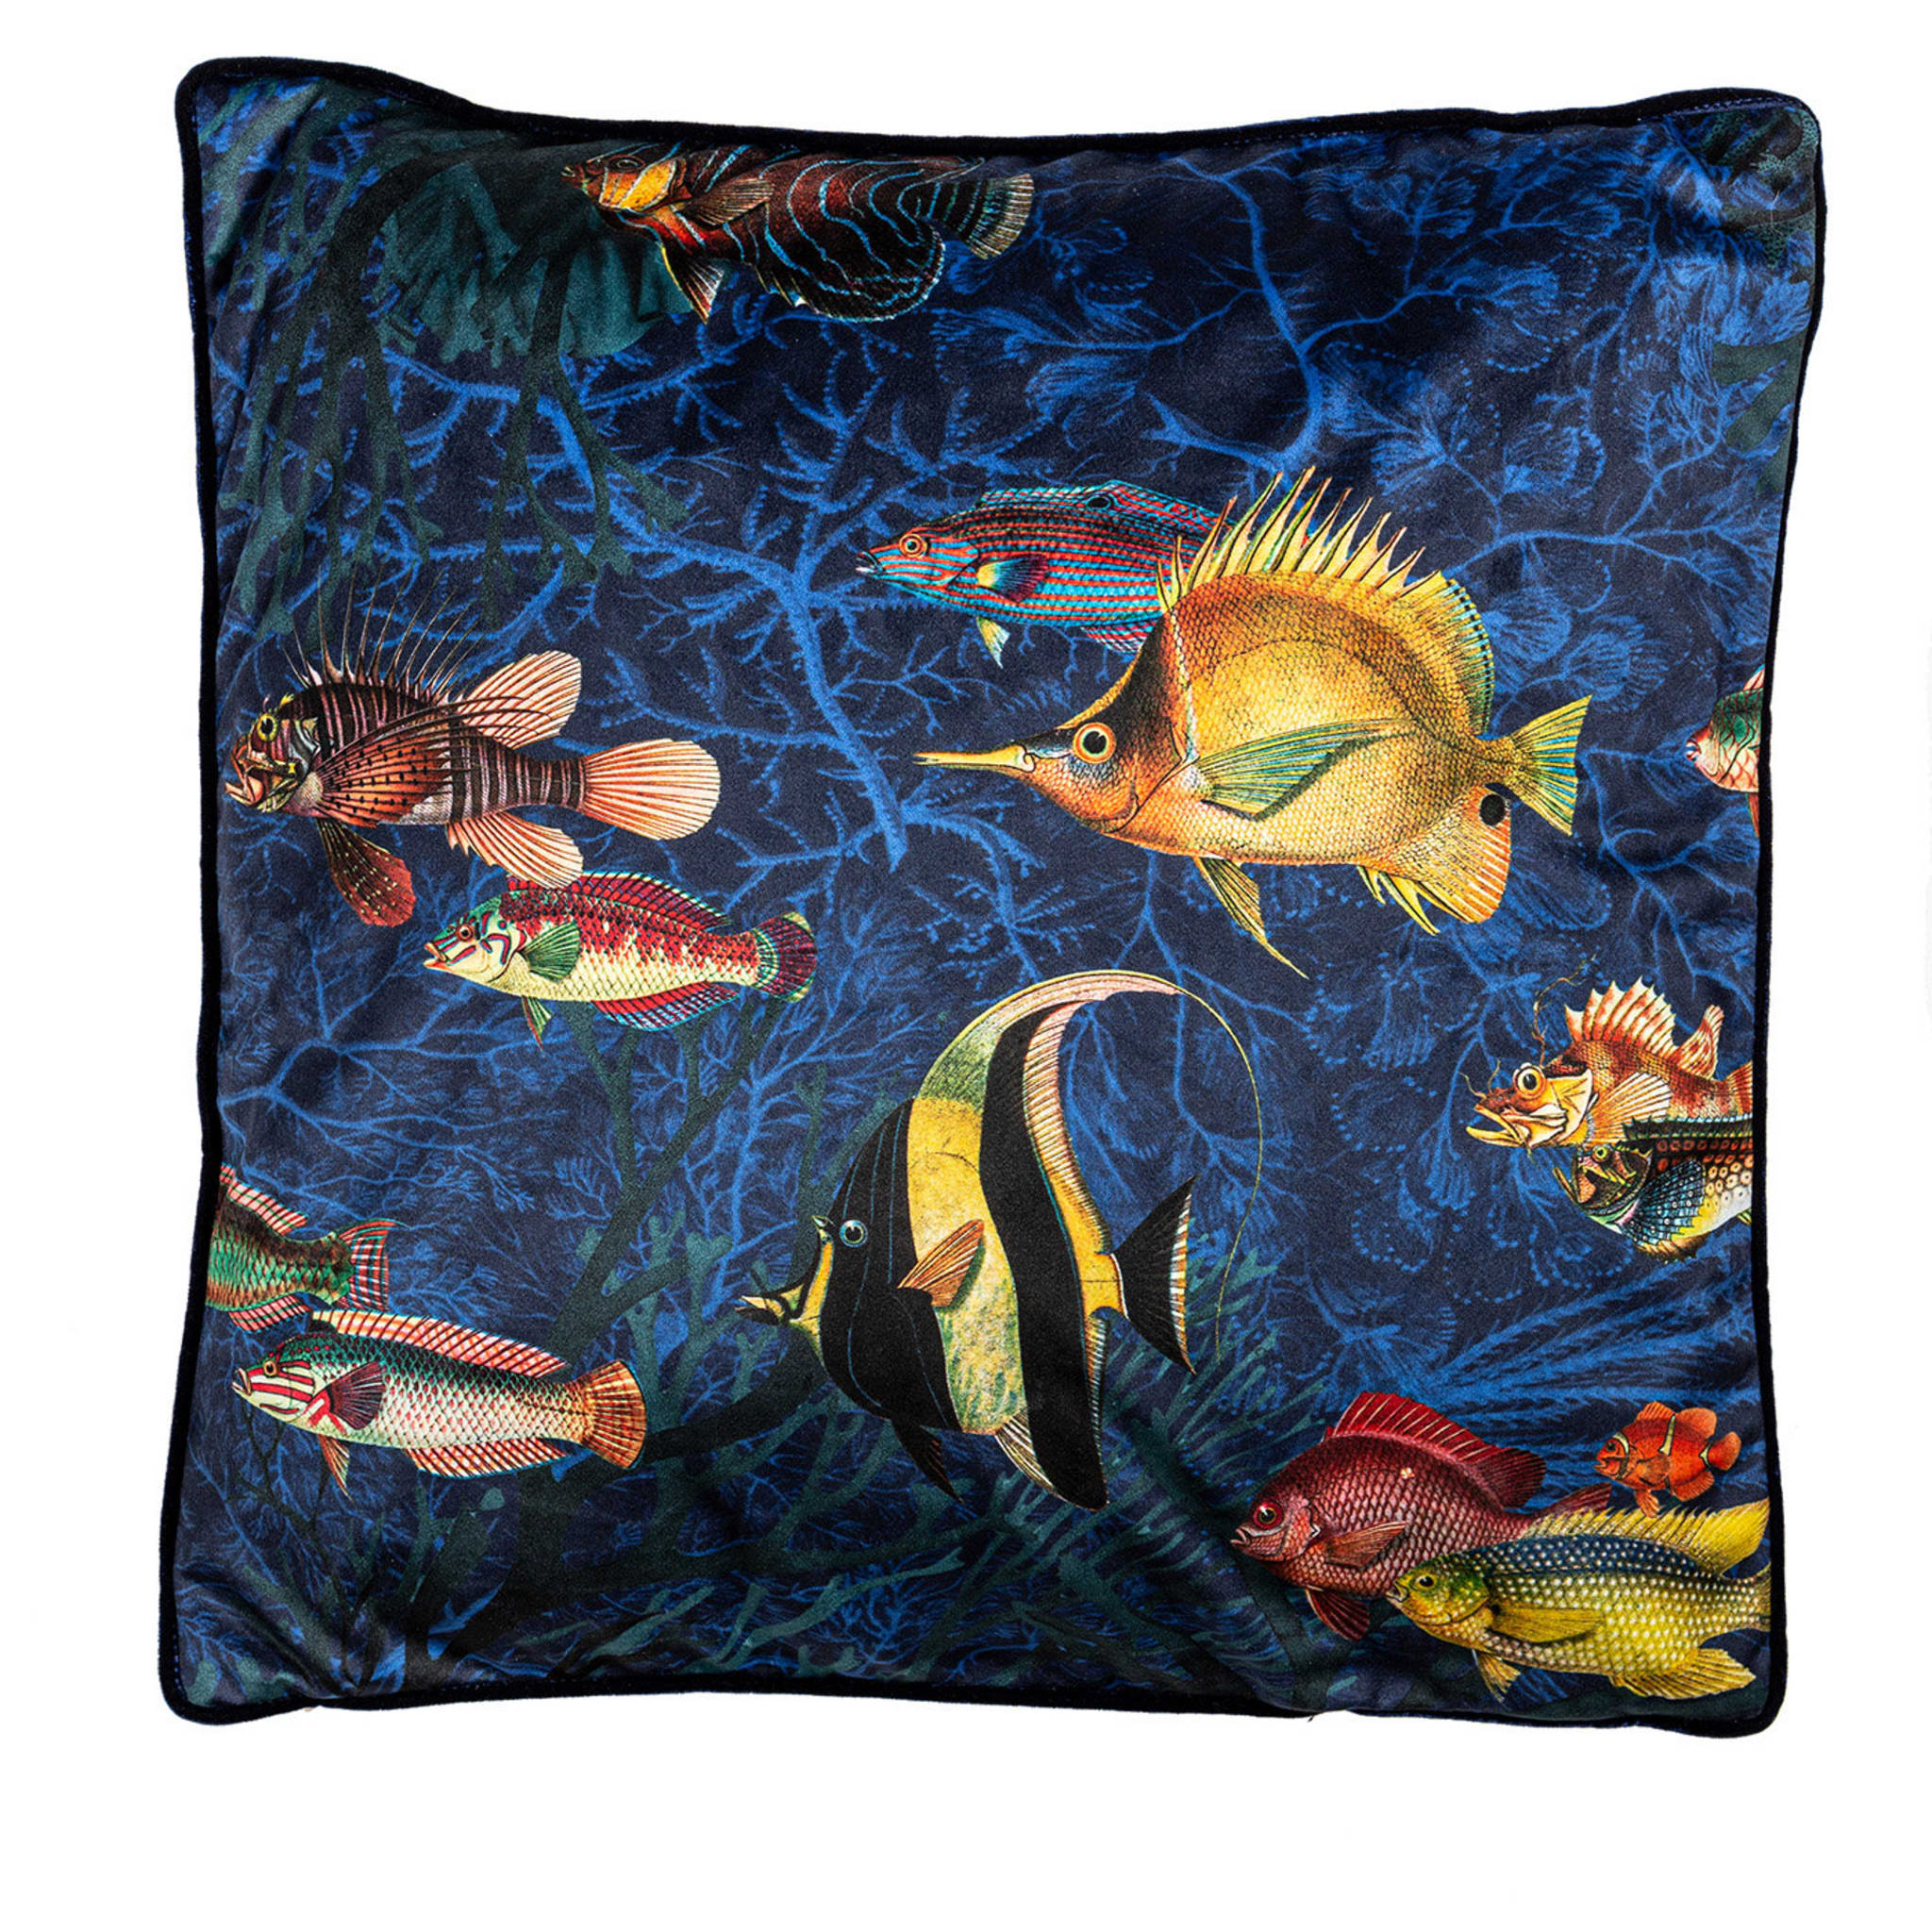 Amami Islands Velvet Cushion With Tropical Fish #1 - Main view